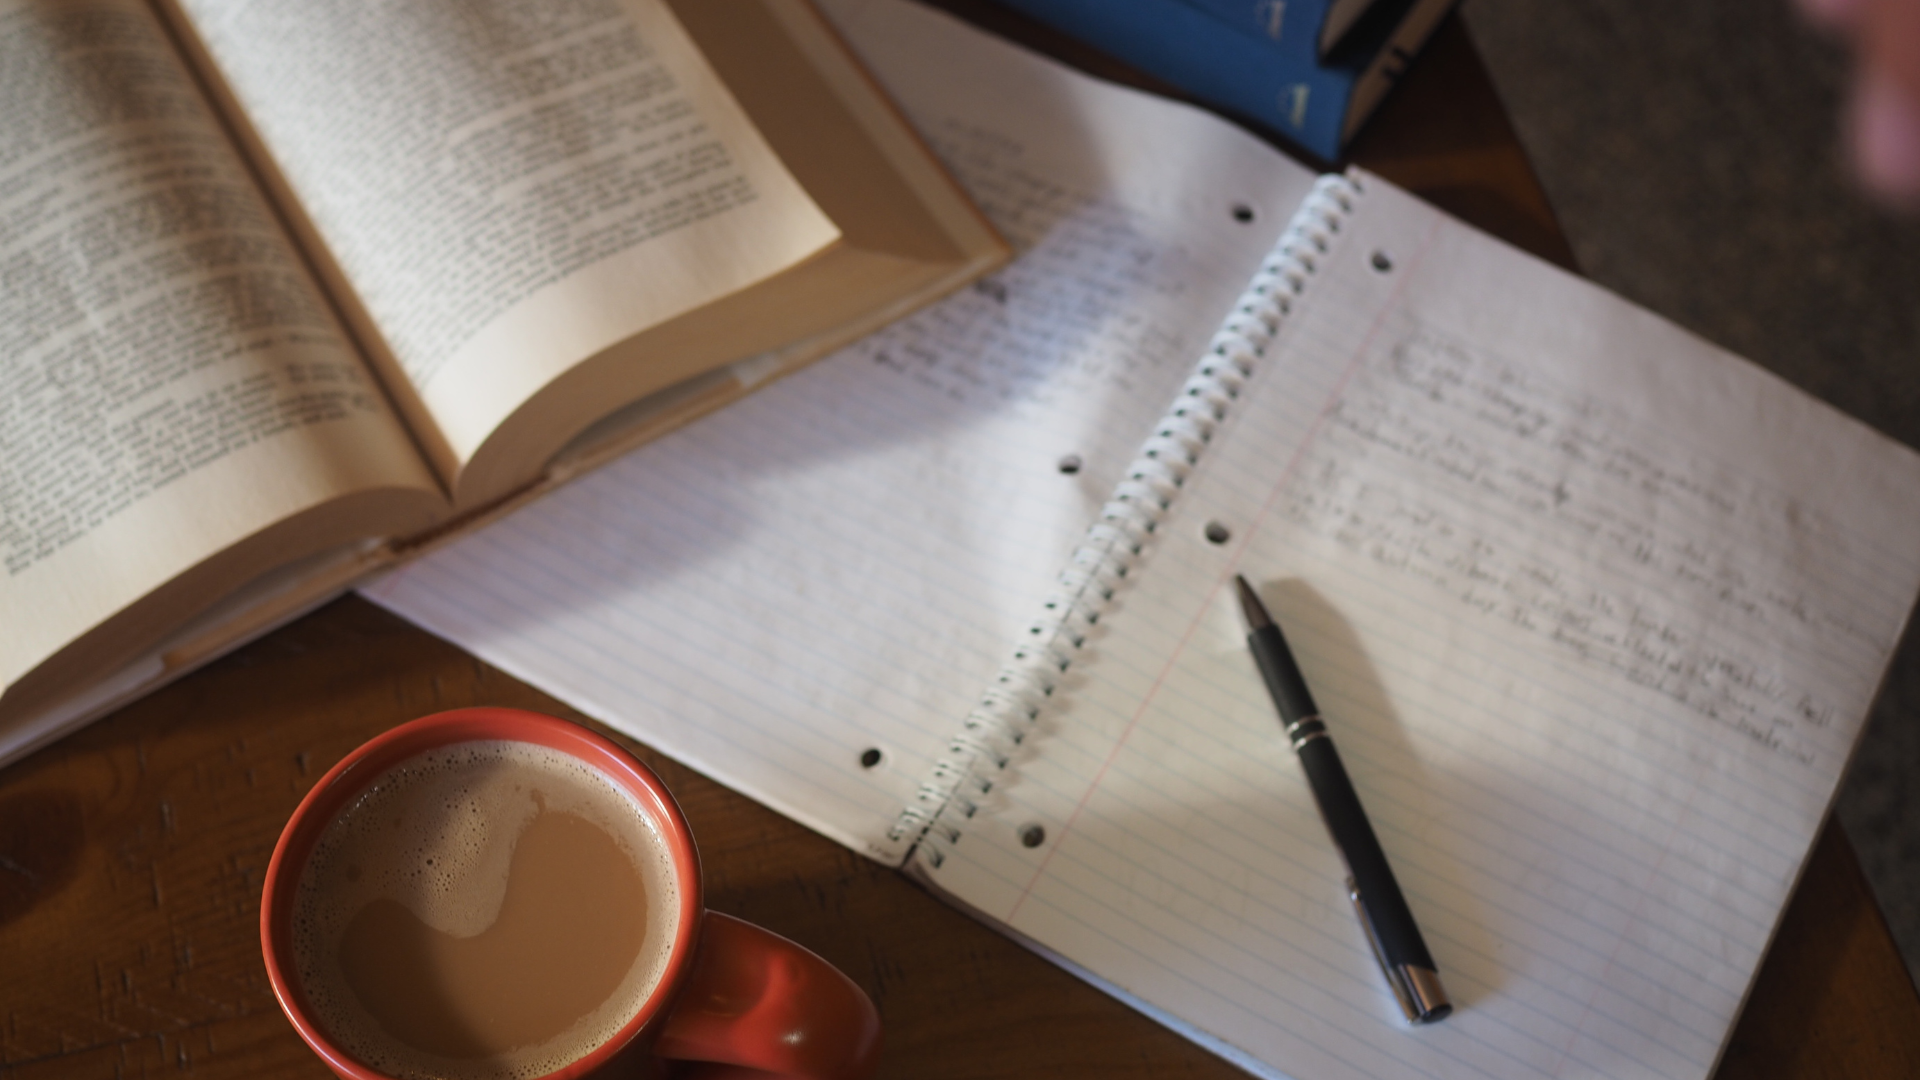 Image description of what to expect-A cup of coffee, a book and a pen.